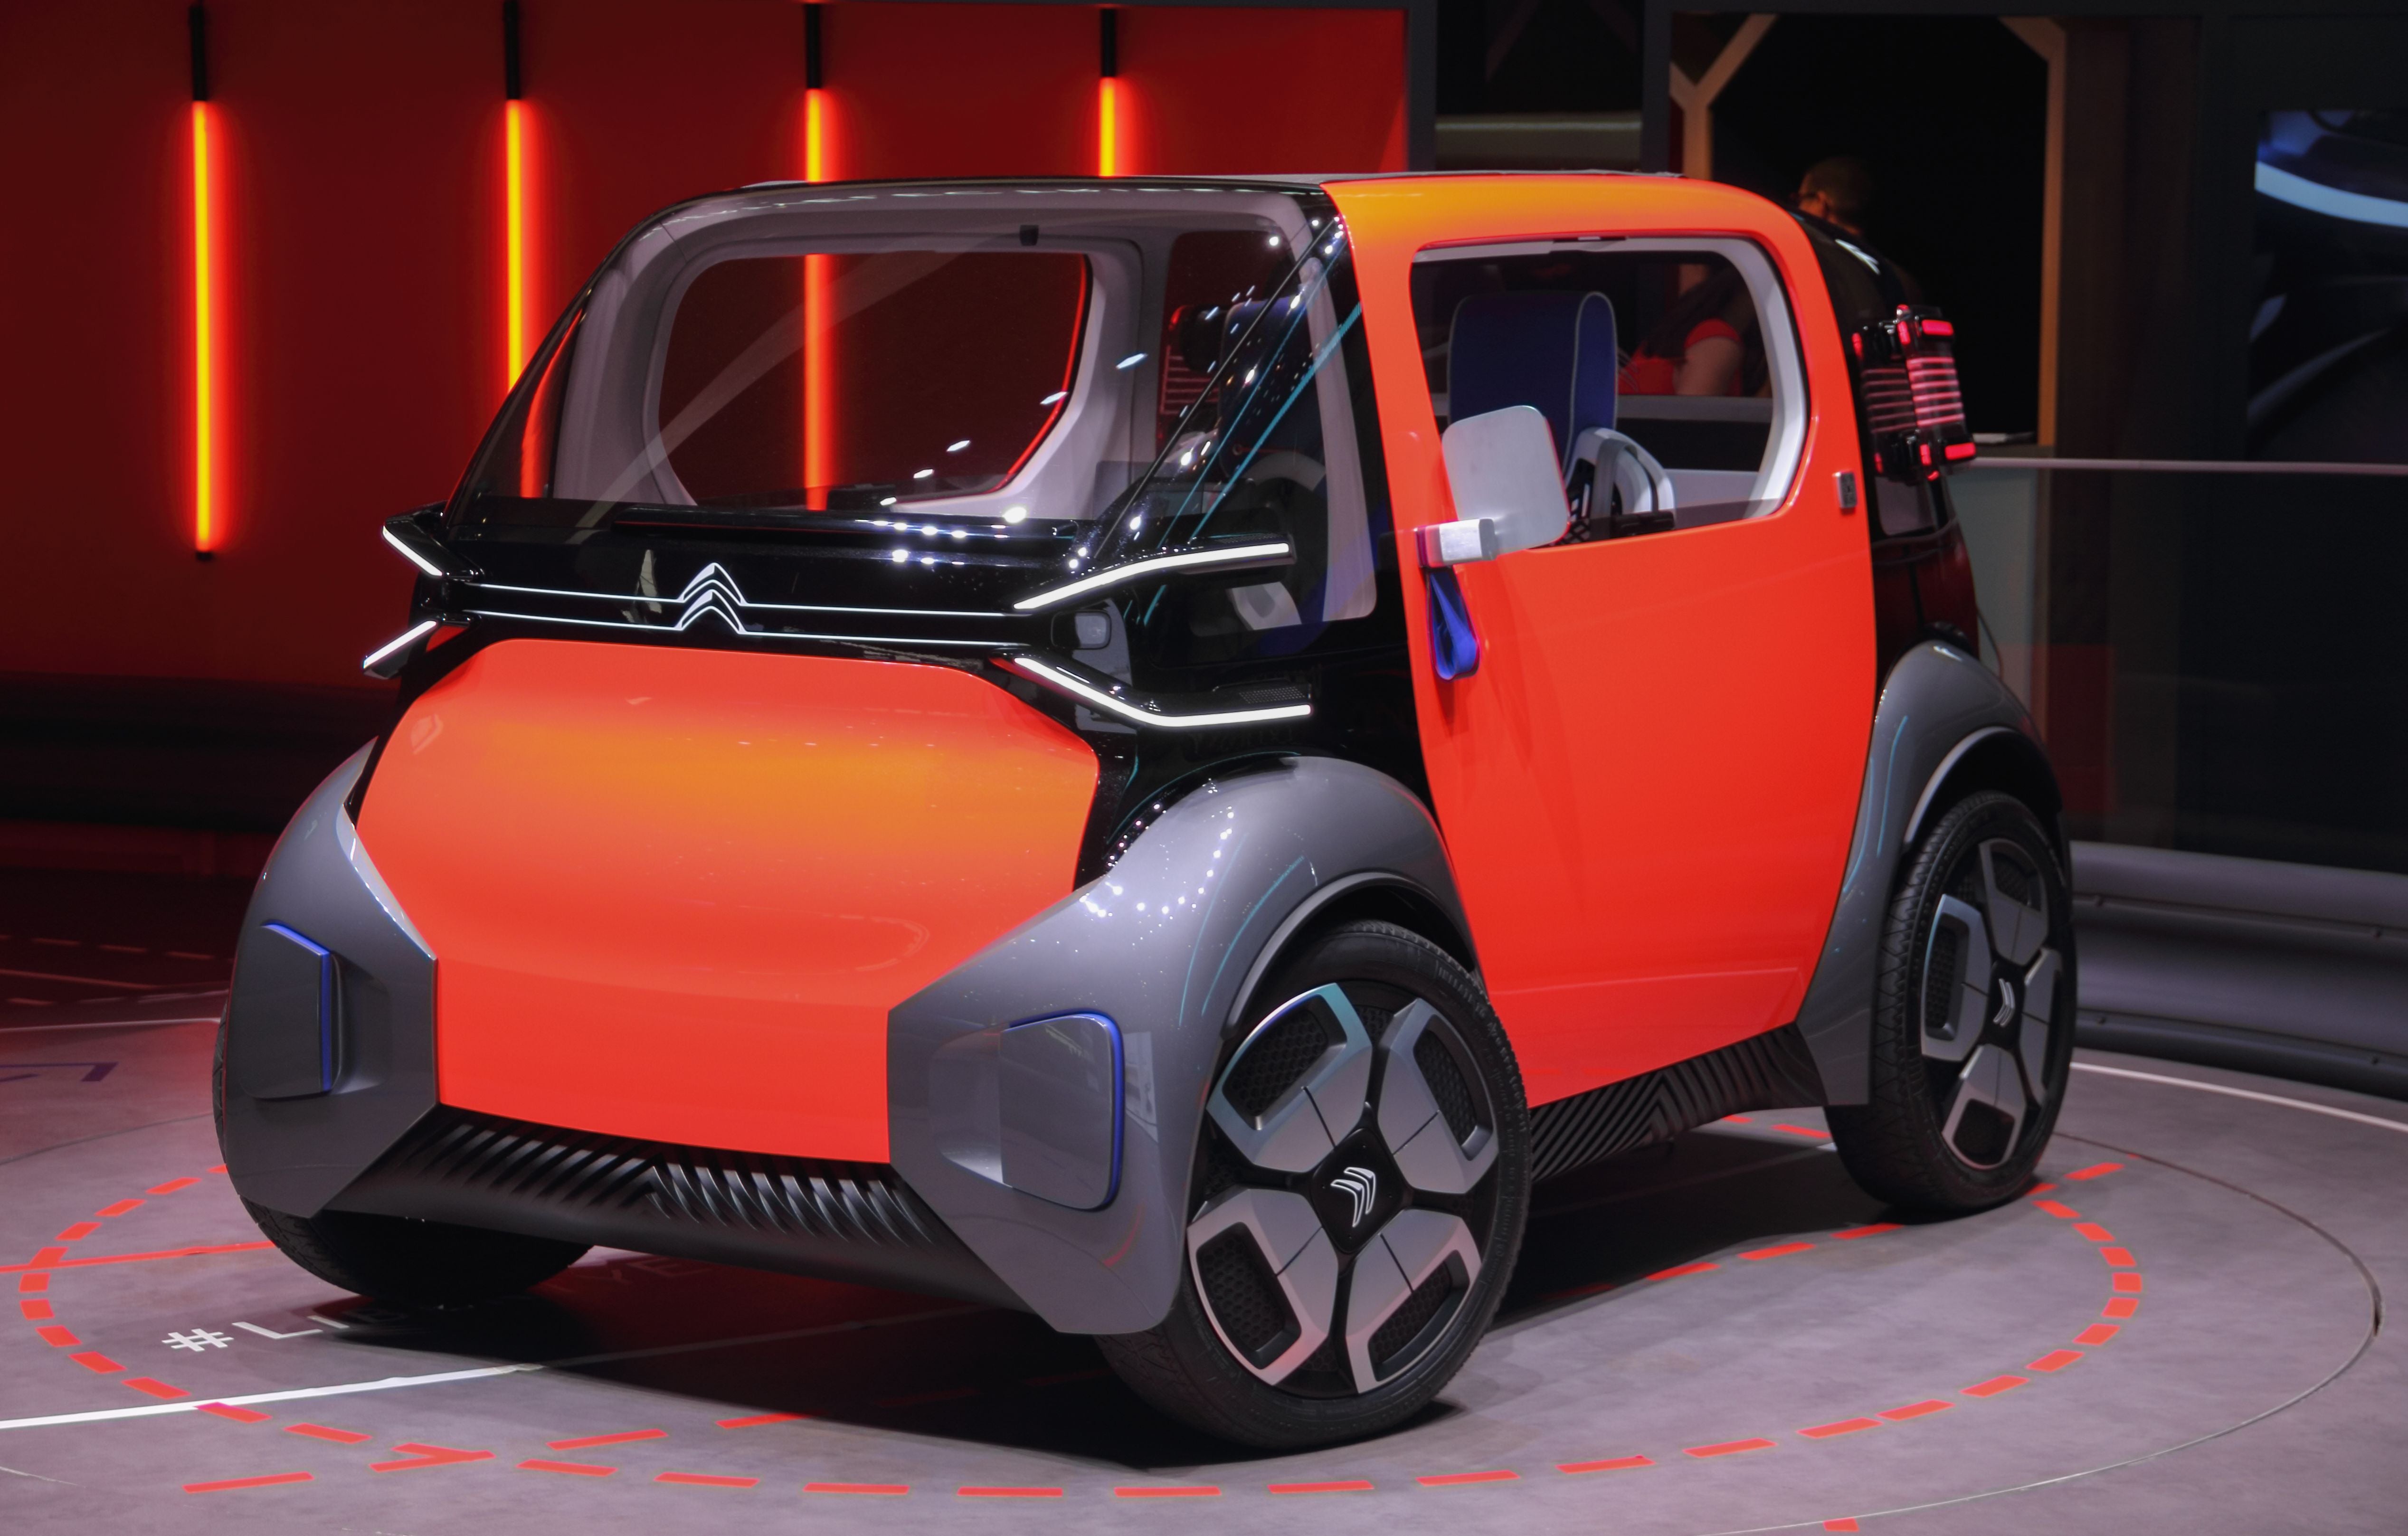 Affordable electric car Ami revealed by Citroen for smart urban mobility